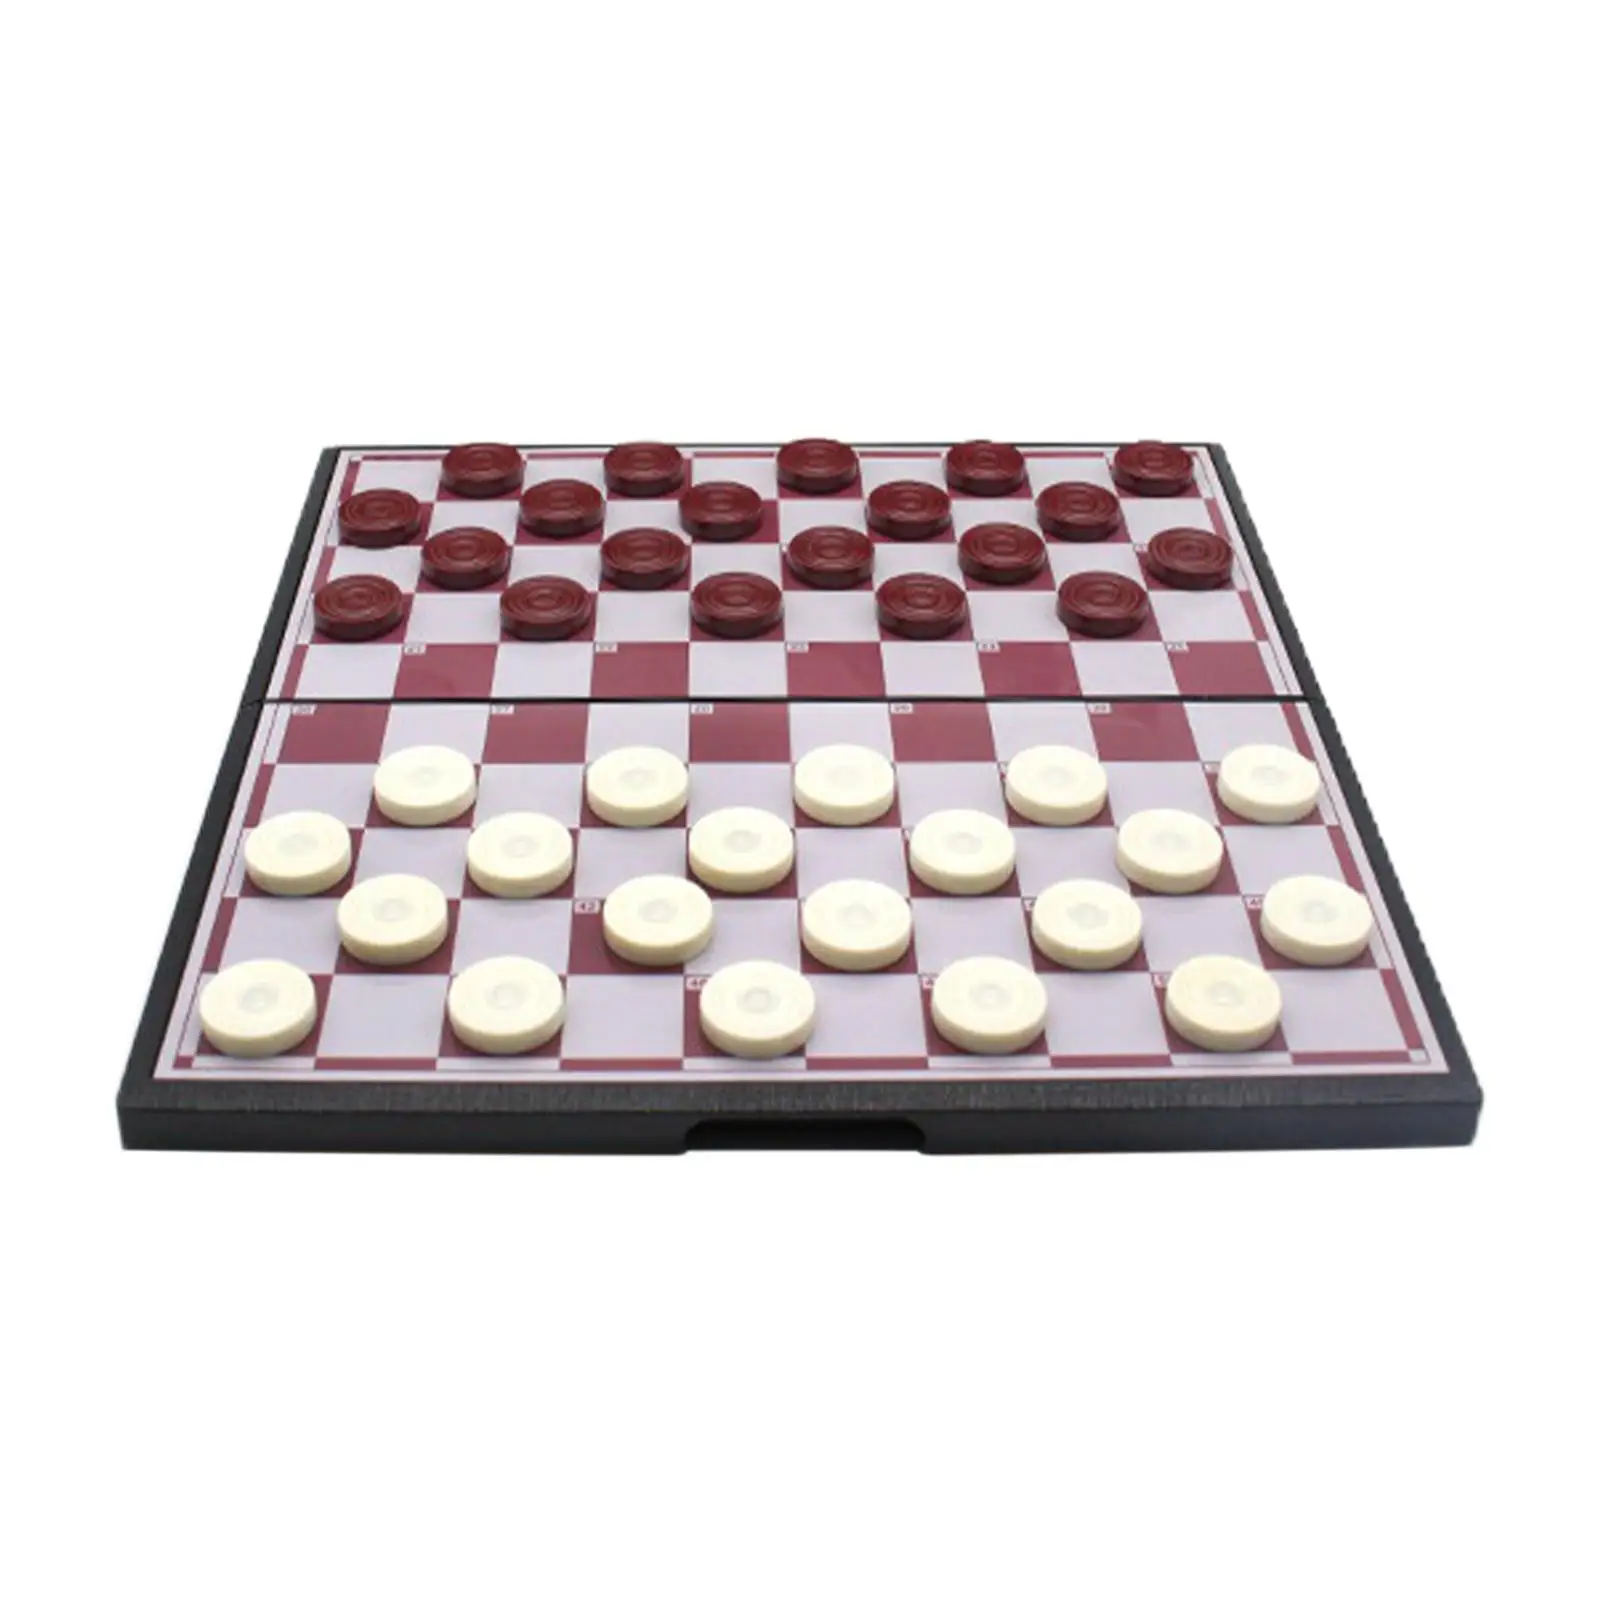  inch Magnetic Checkers Board Game Foldable Checkers Board for children fun